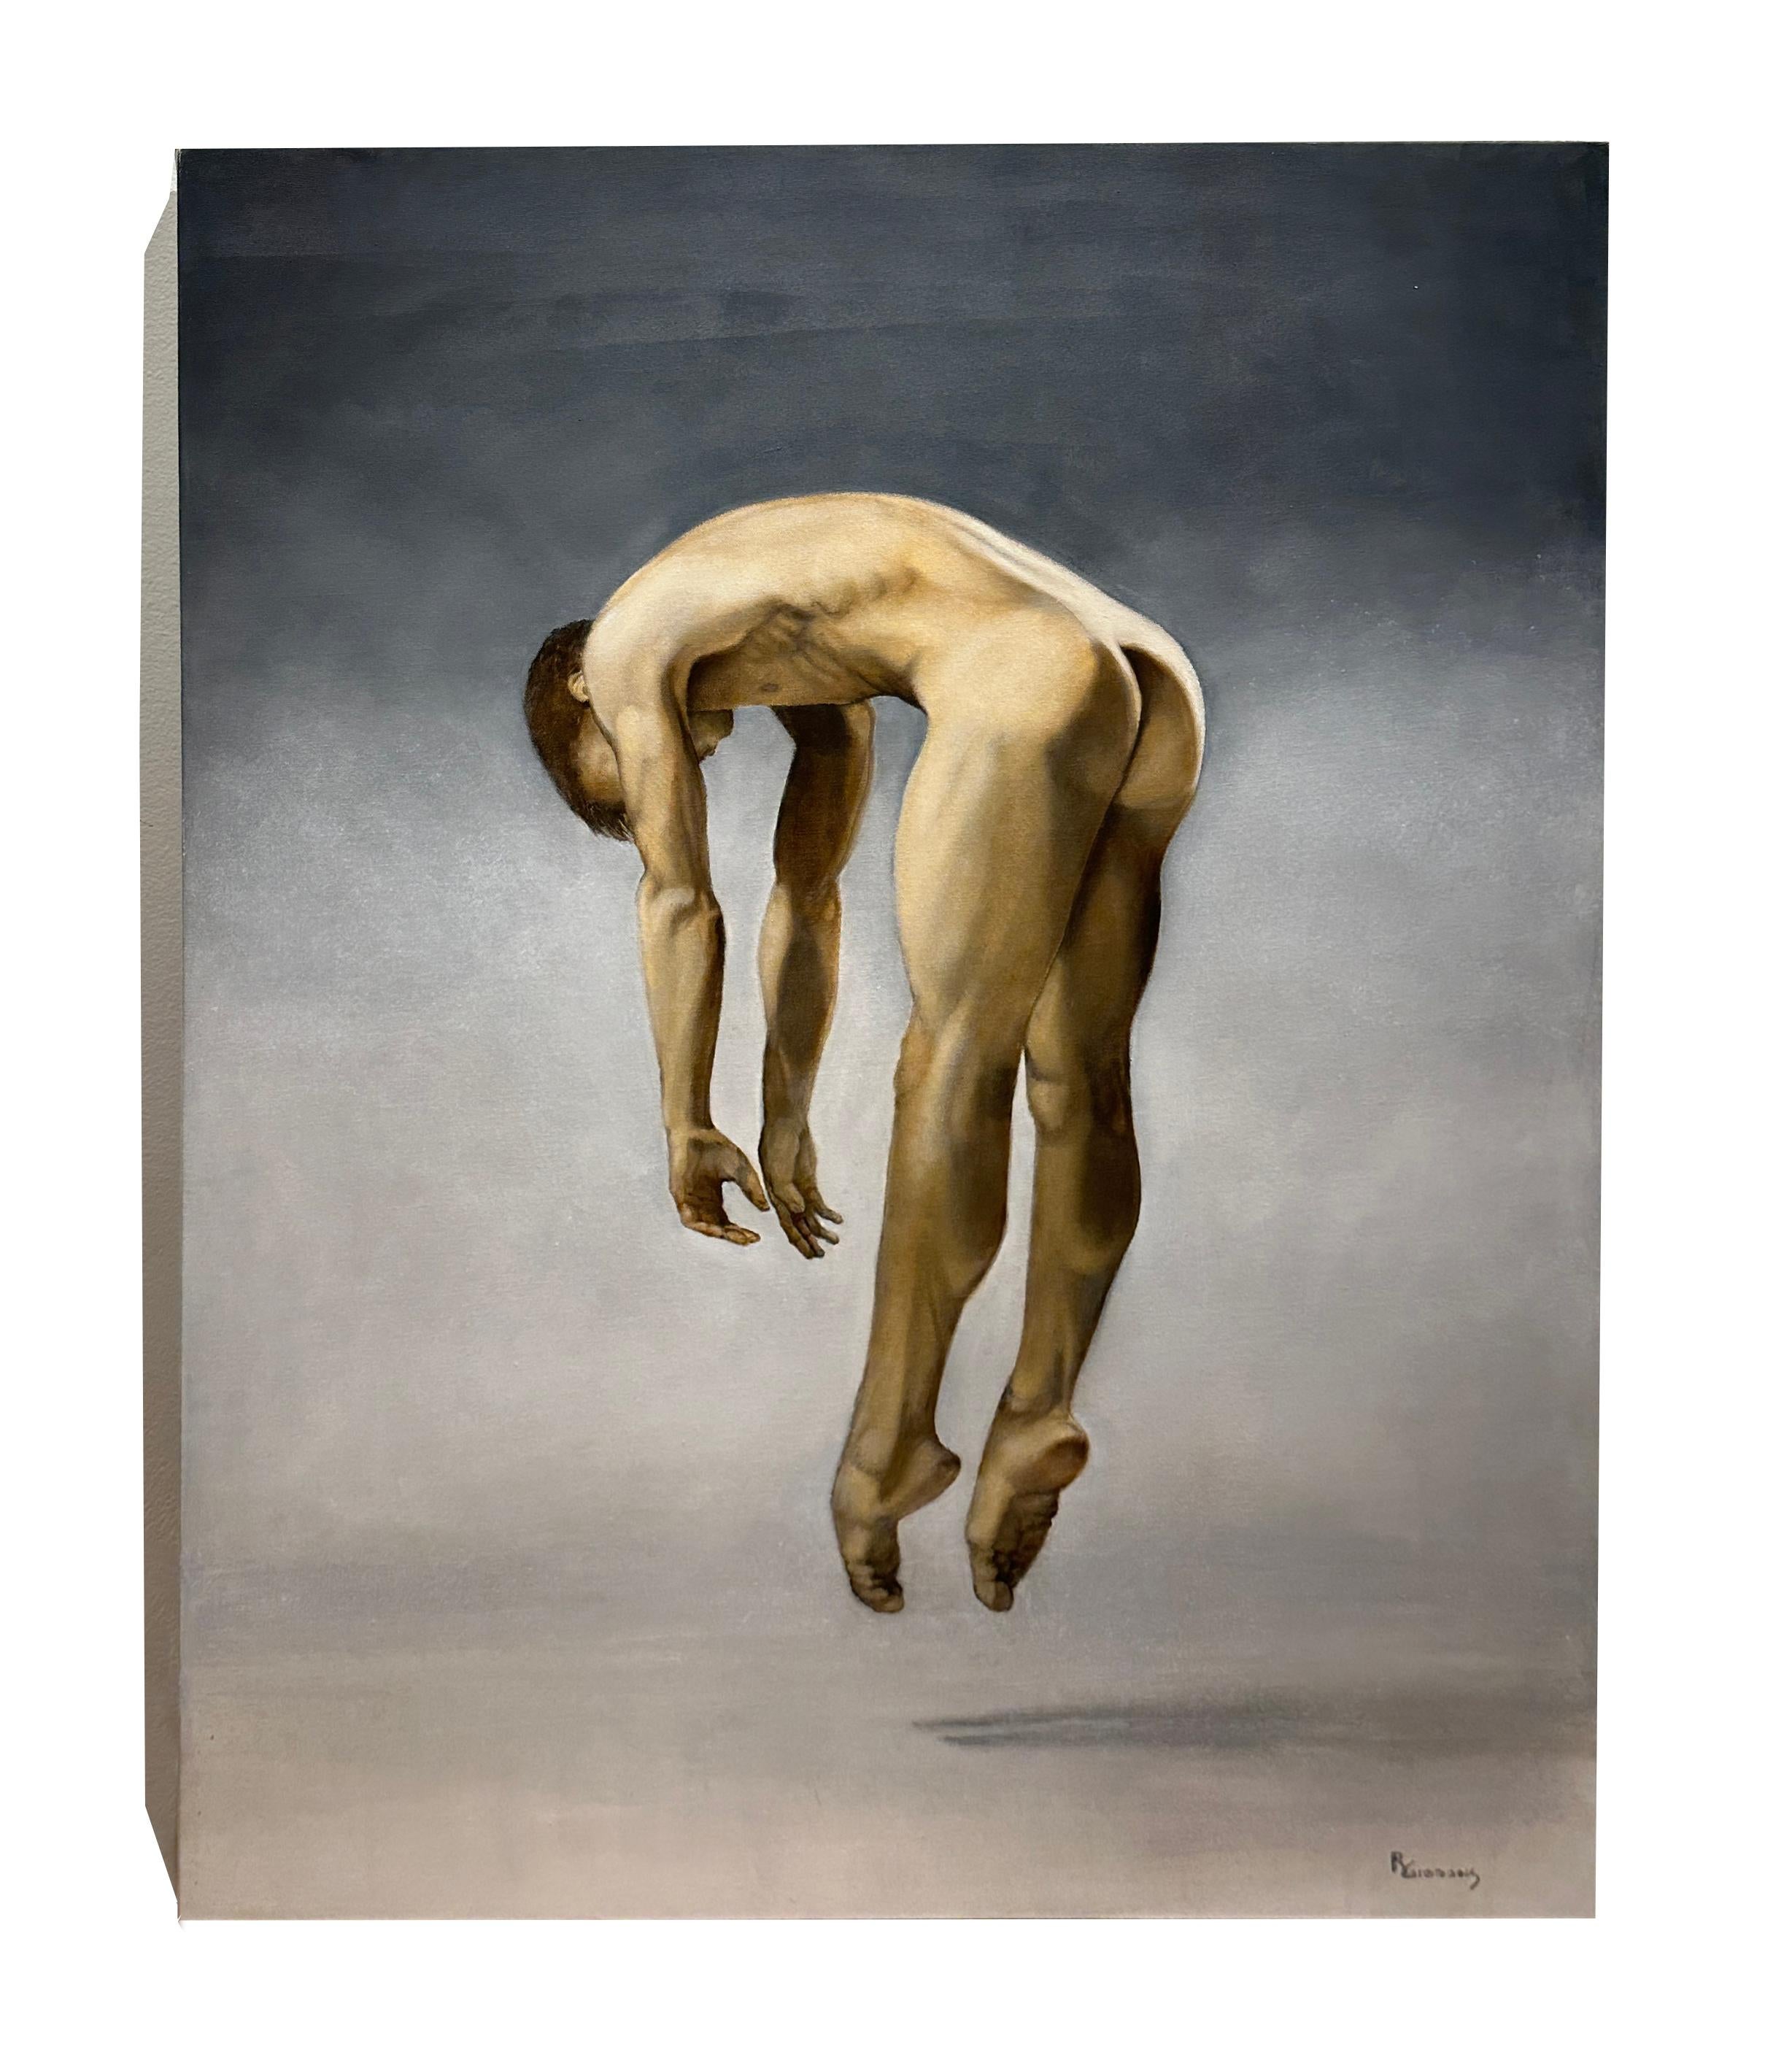 Hover - Male Nude Suspended in Air, Side View, Original Oil on Canvas - Painting by Richard Gibbons